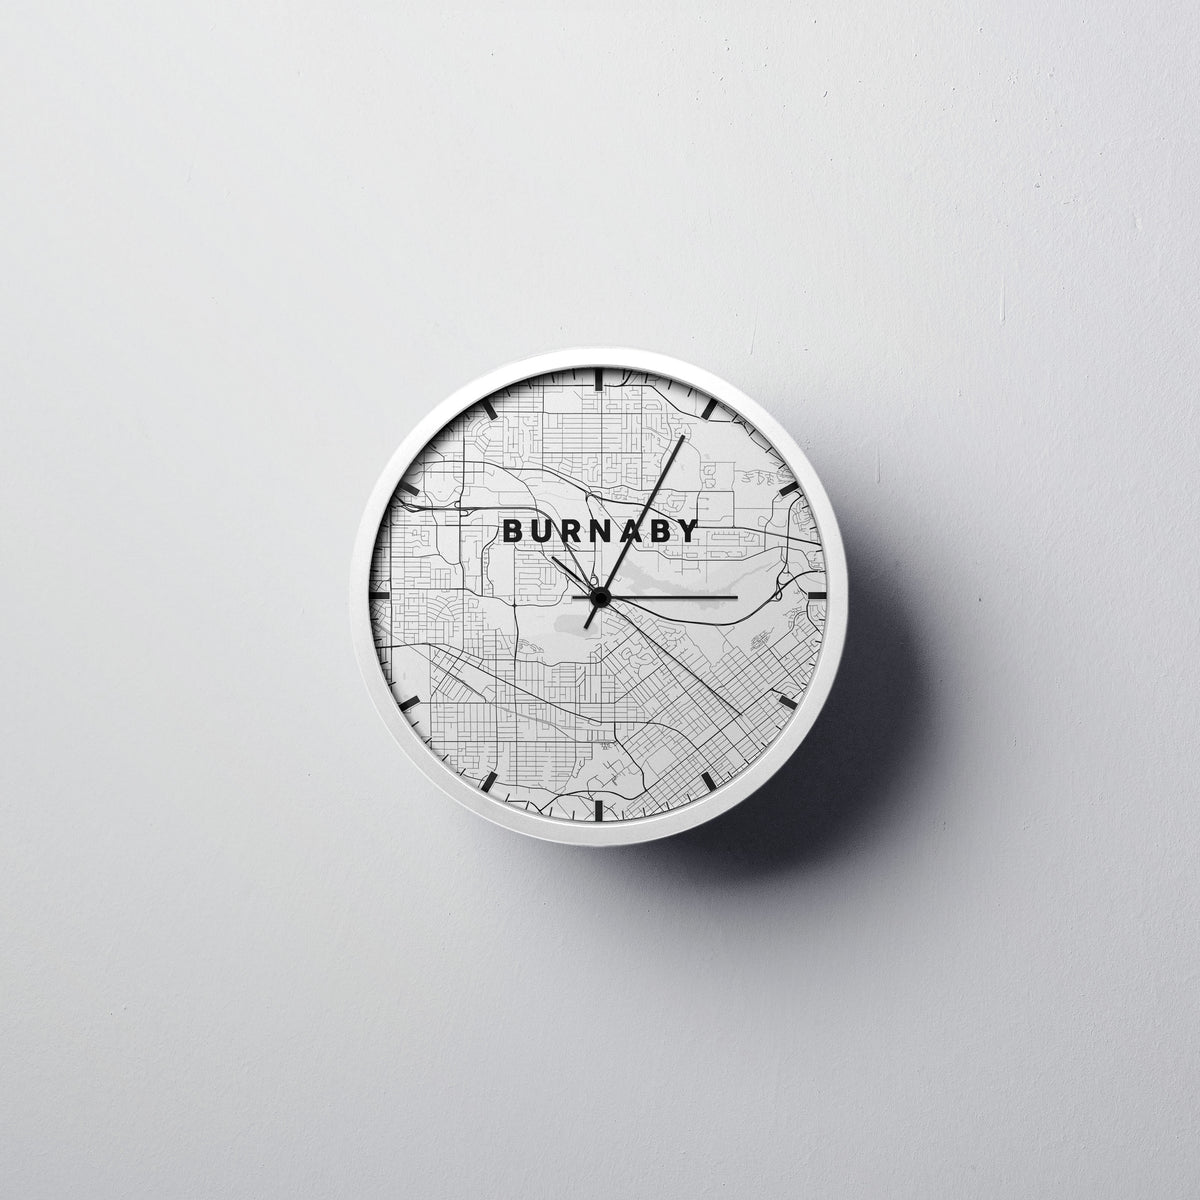 Burnaby Wall Clock - Point Two Design